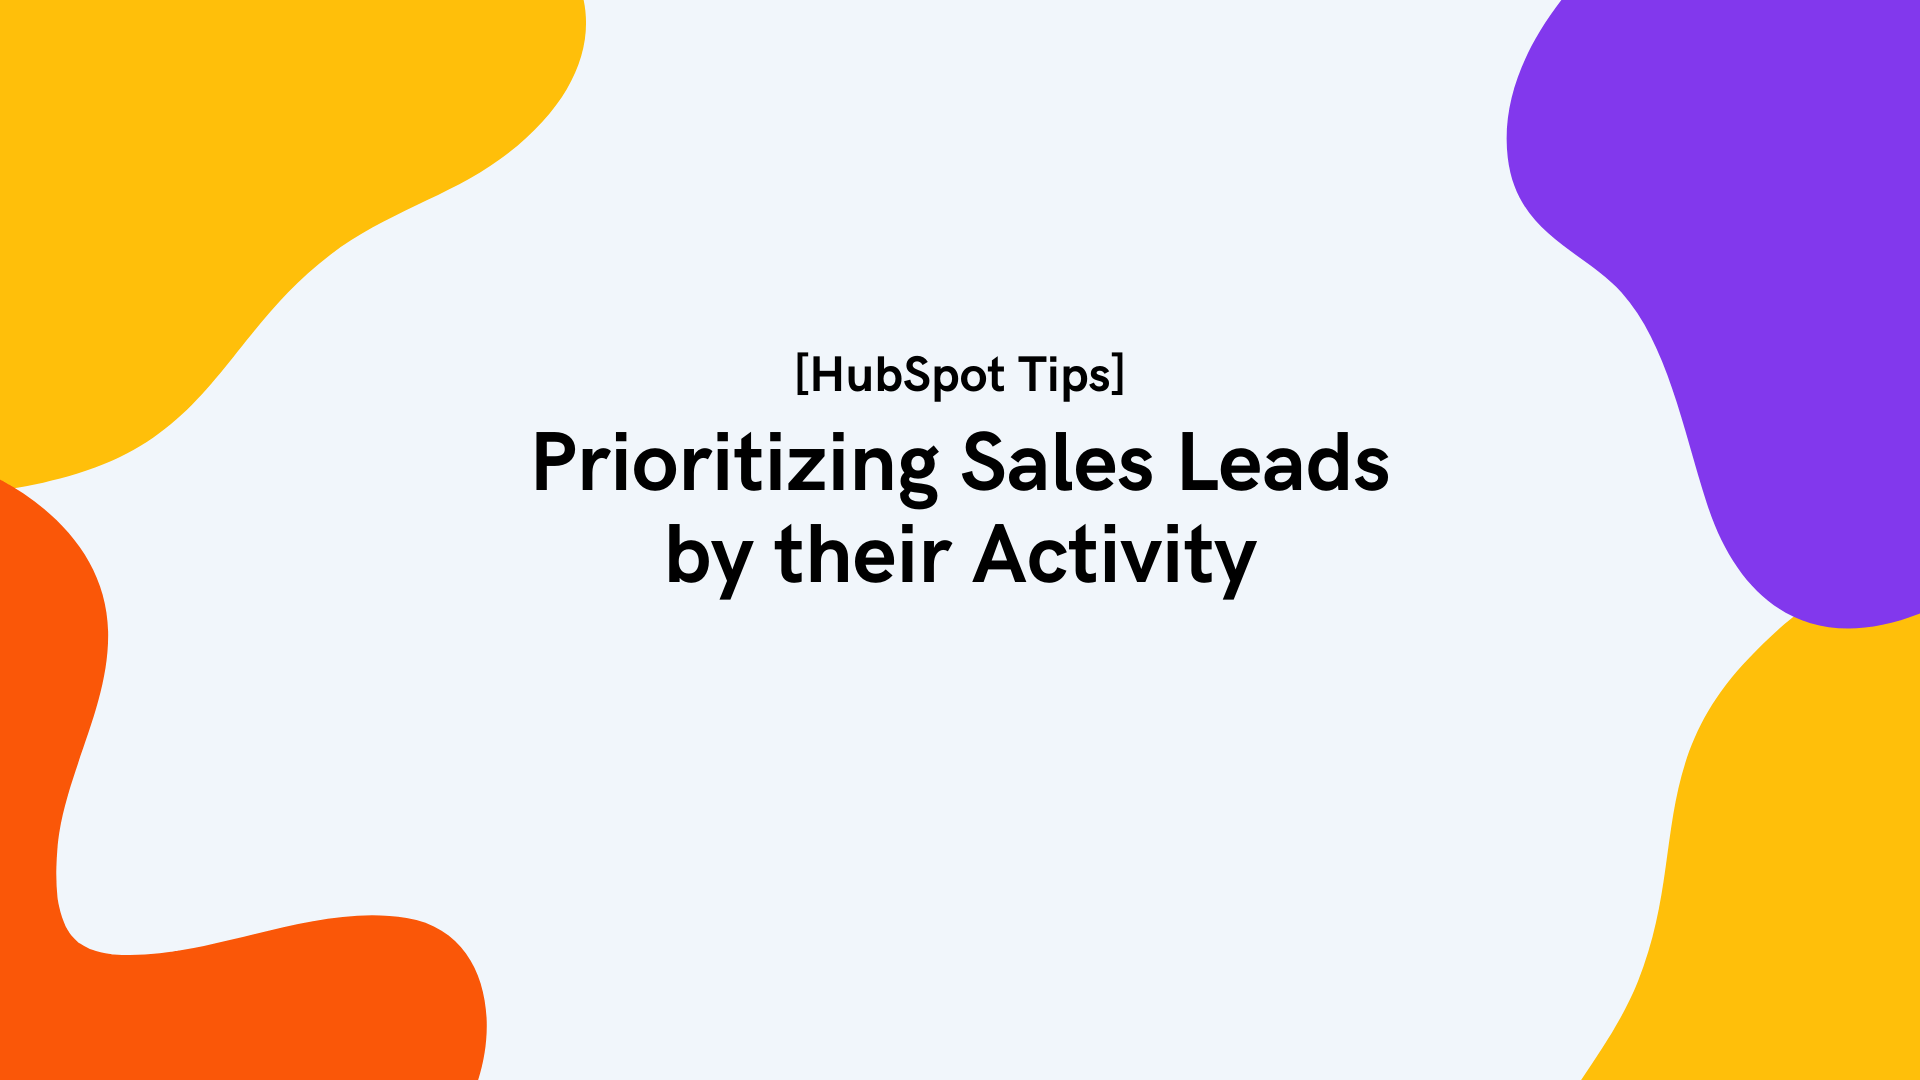 Prioritizing Sales Leads by their Activity [HubSpot Tips]